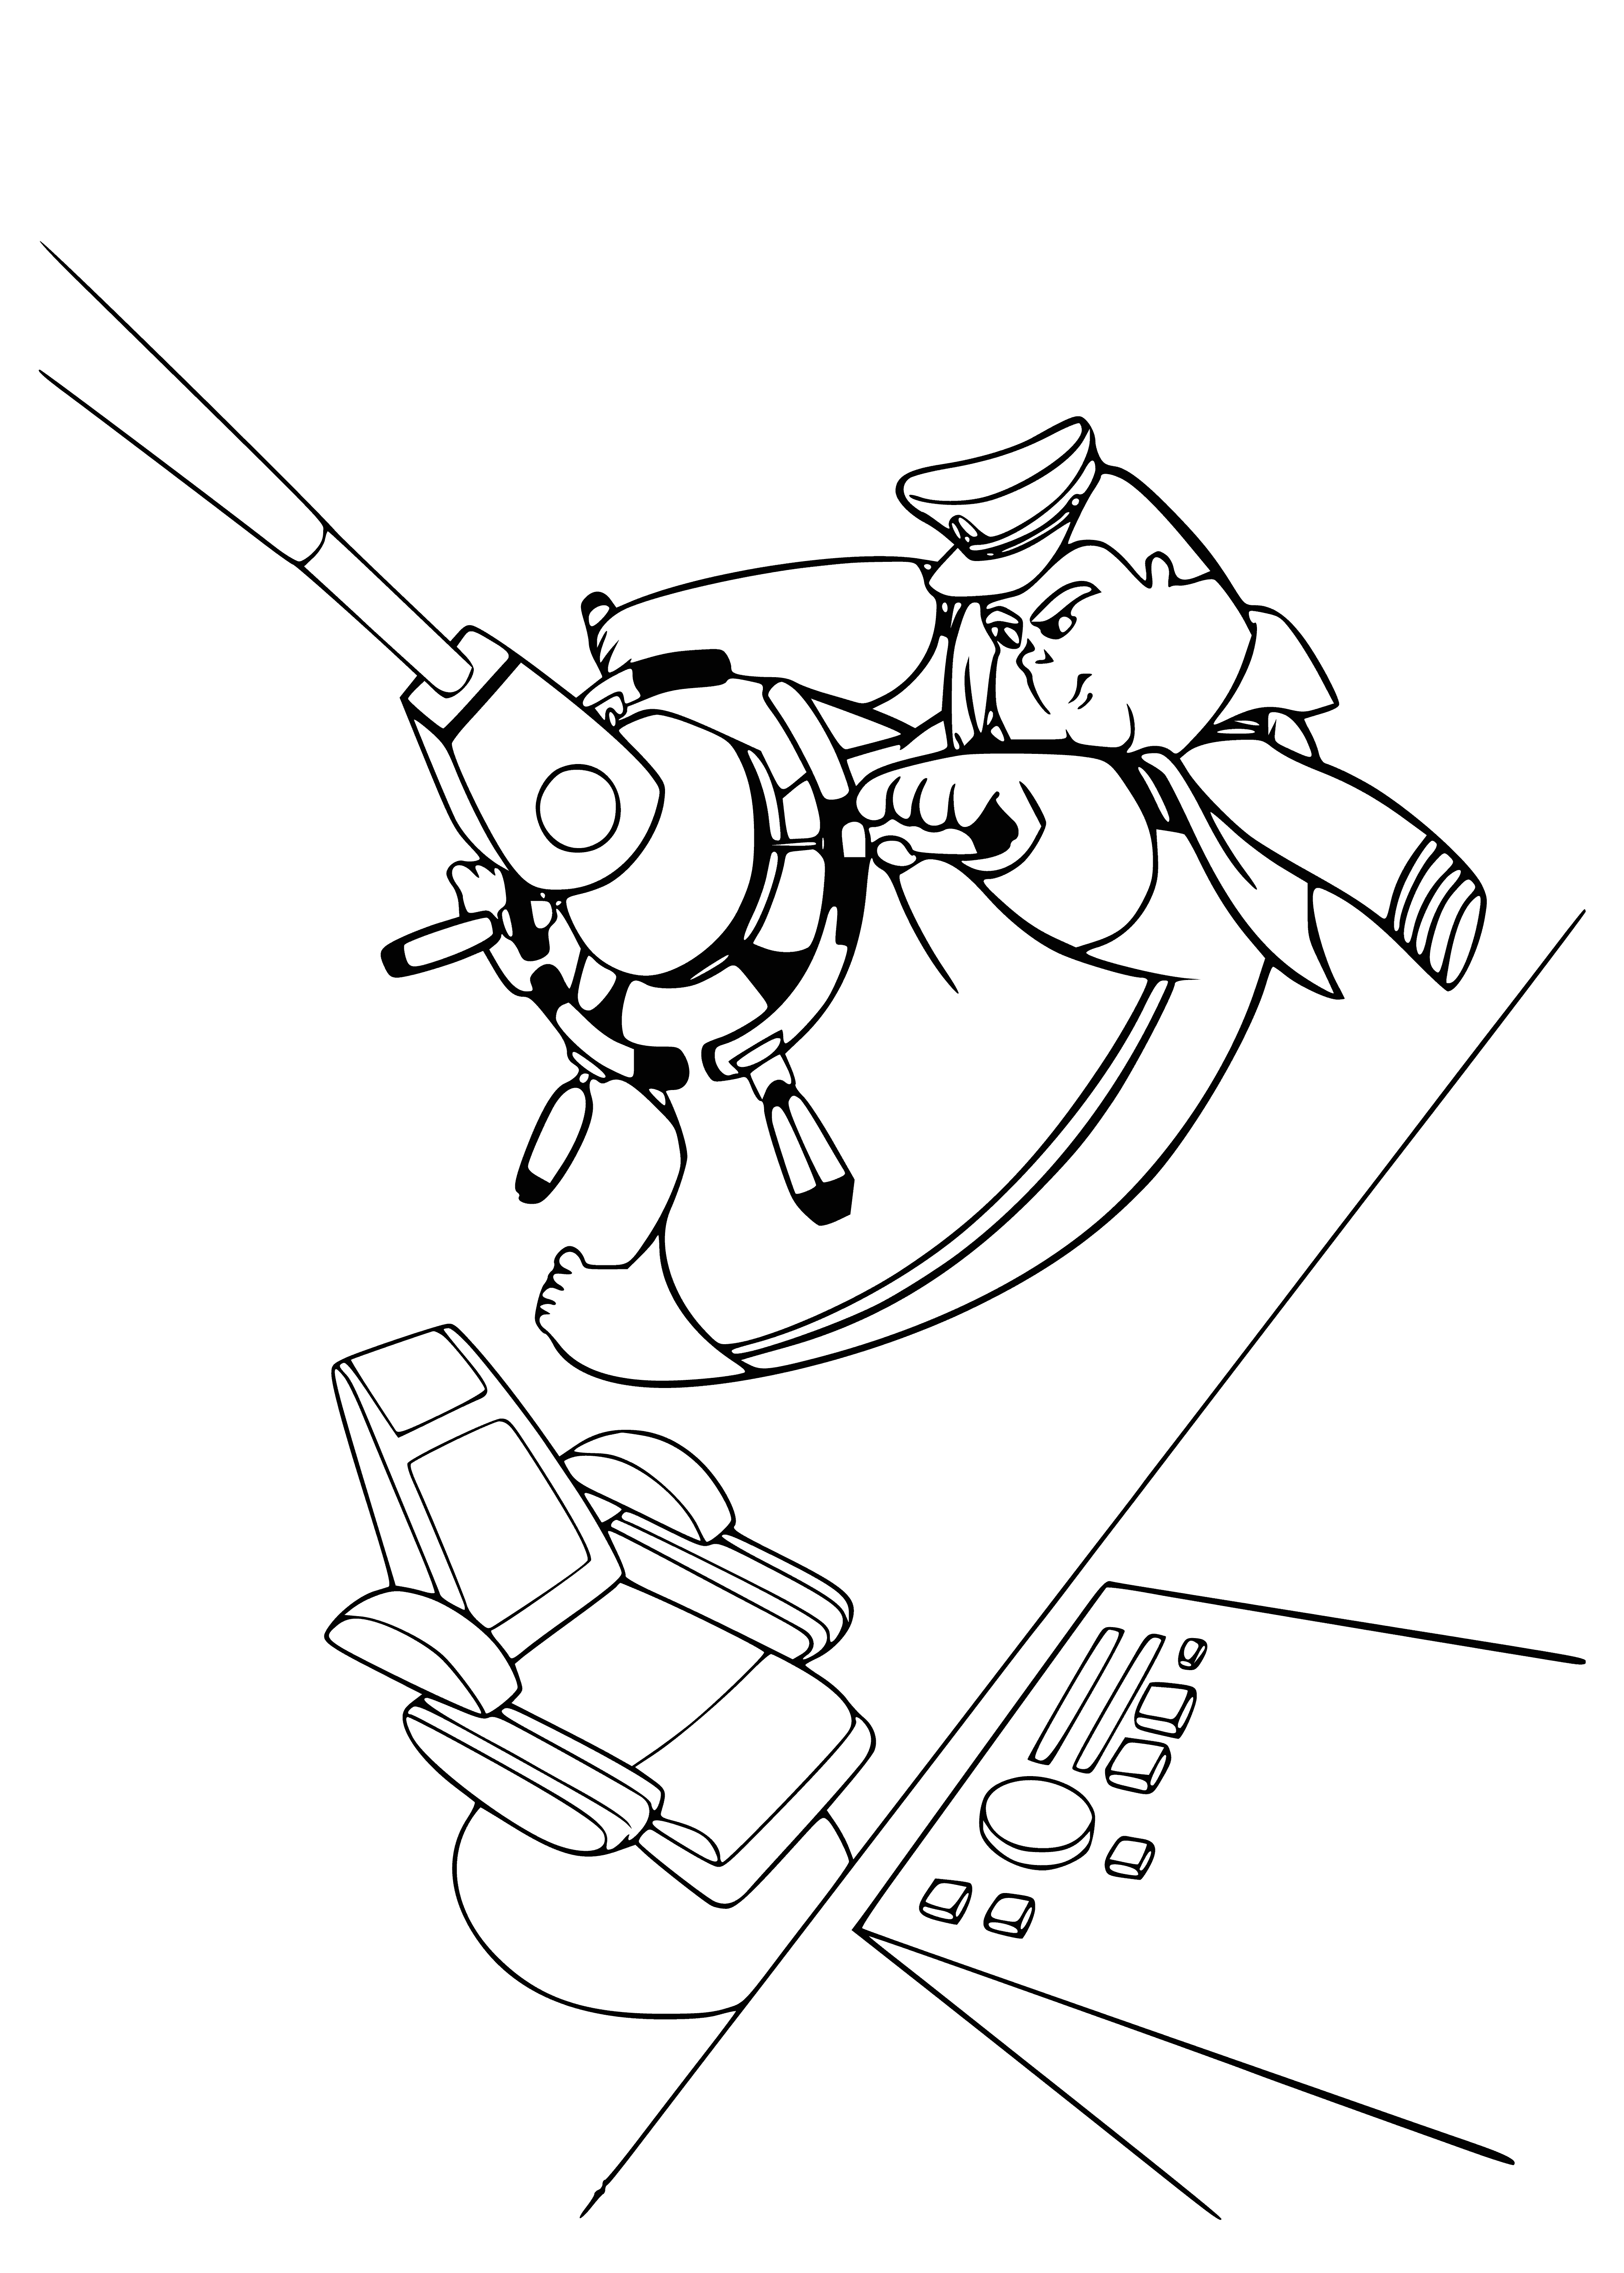 coloring page: Man in red suit fights robot with large circular head & two long arms. He punches, robot fights back with arms.